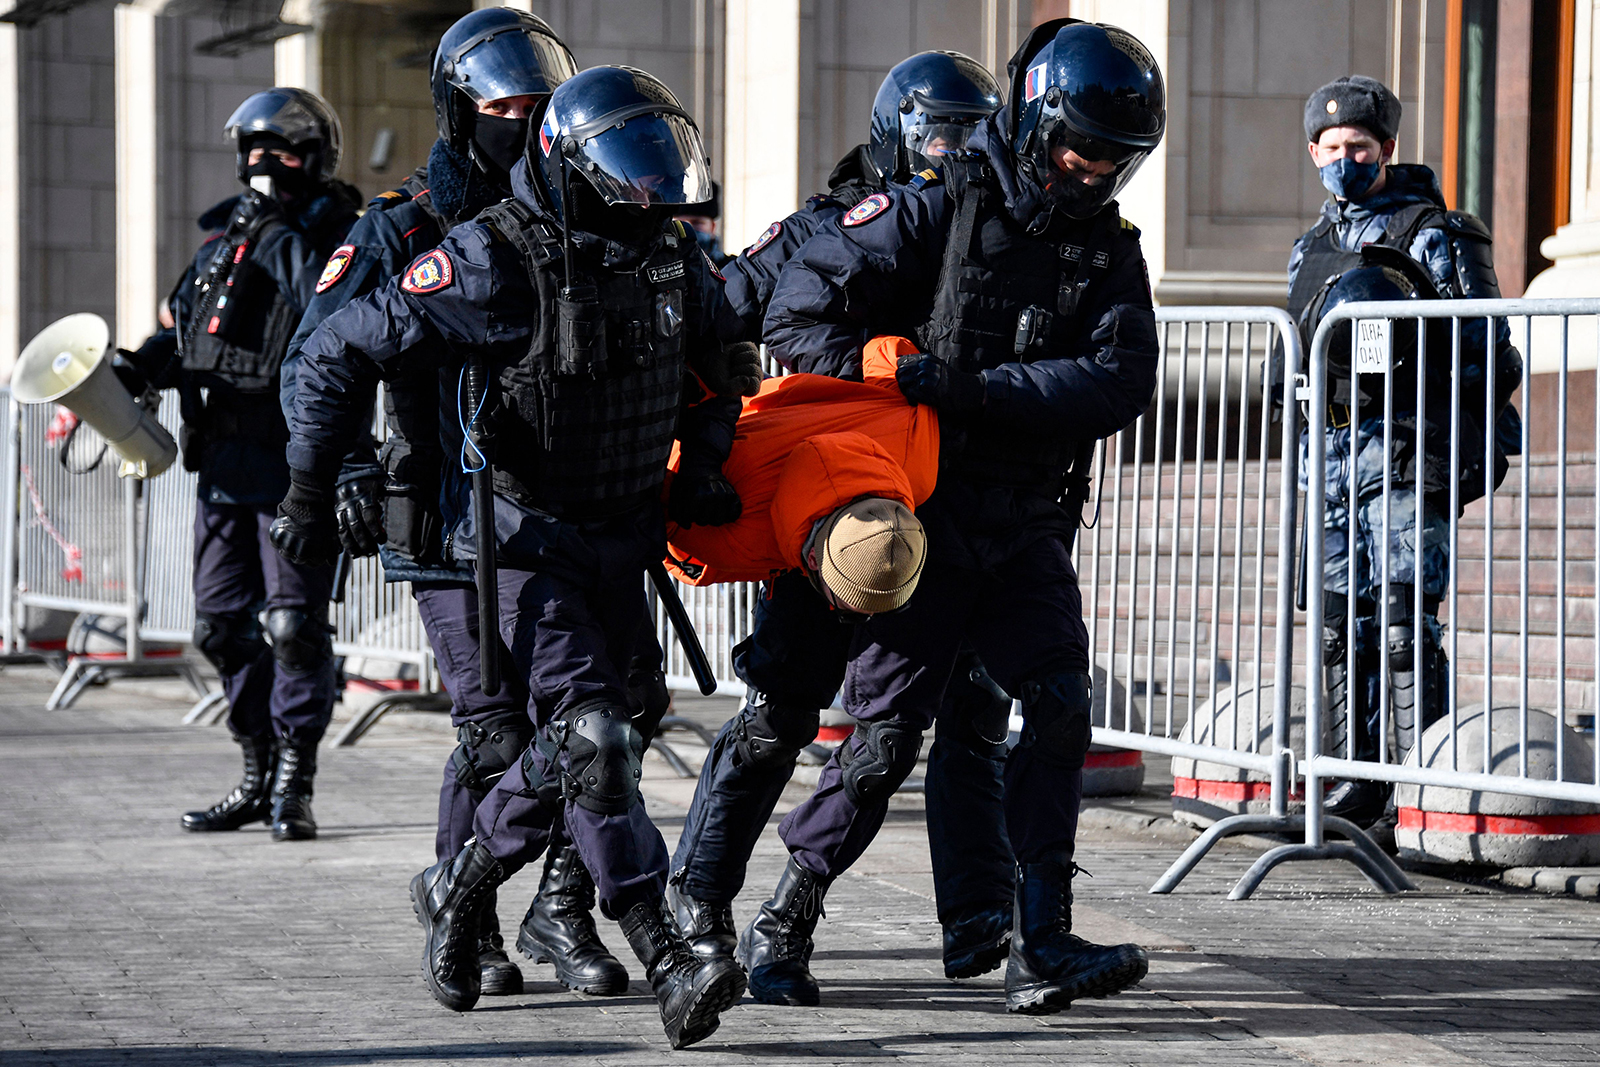 Police officers detain a man during a protest against Russian military action in Ukraine, in Manezhnaya Square in central Moscow on March 13.